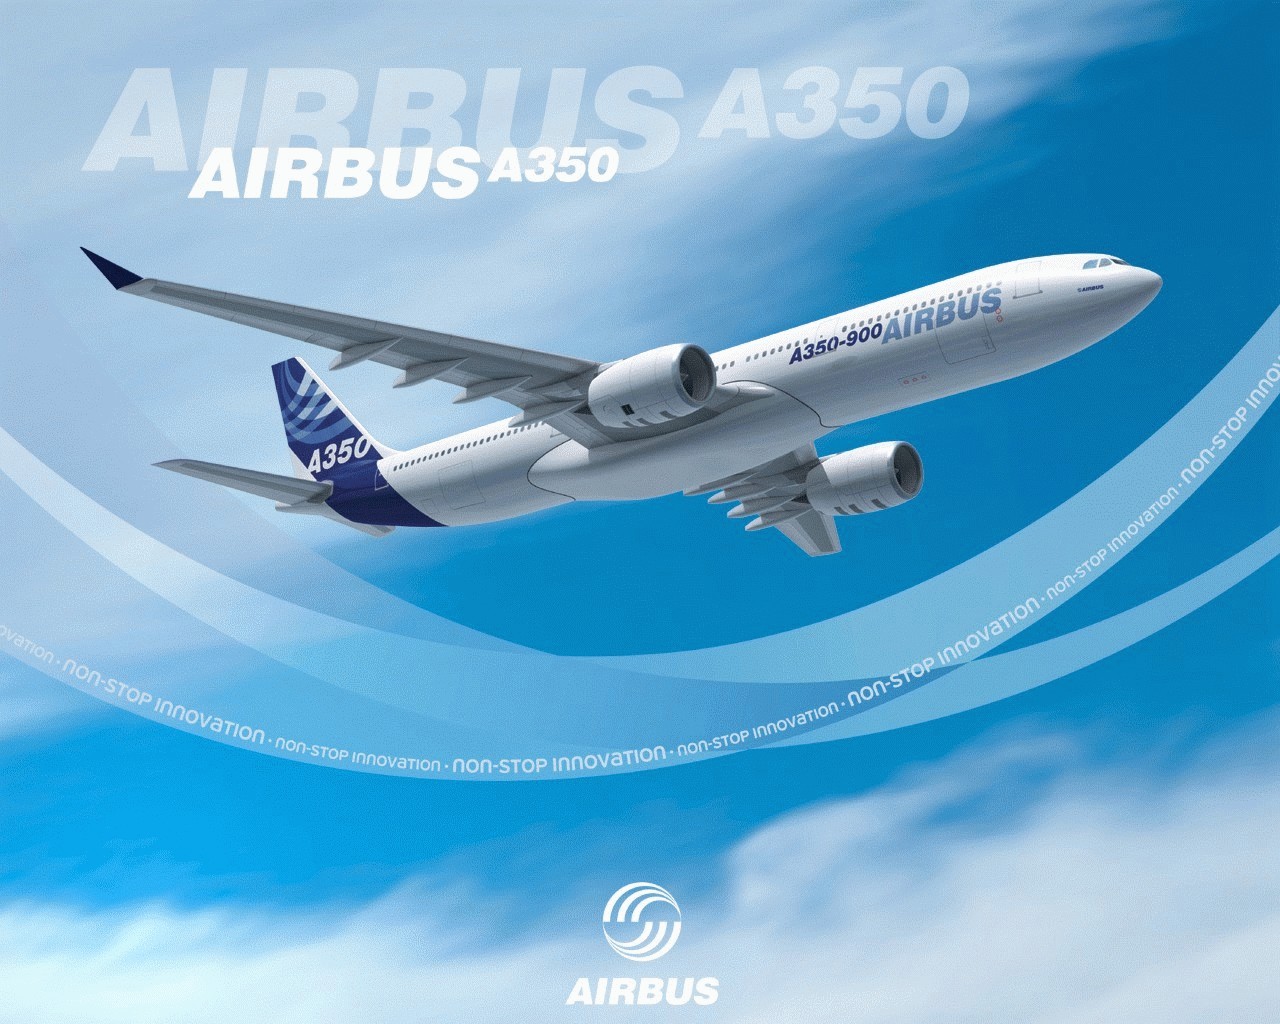 Airbus A350 Wallpaper Resolution 217s Image Size